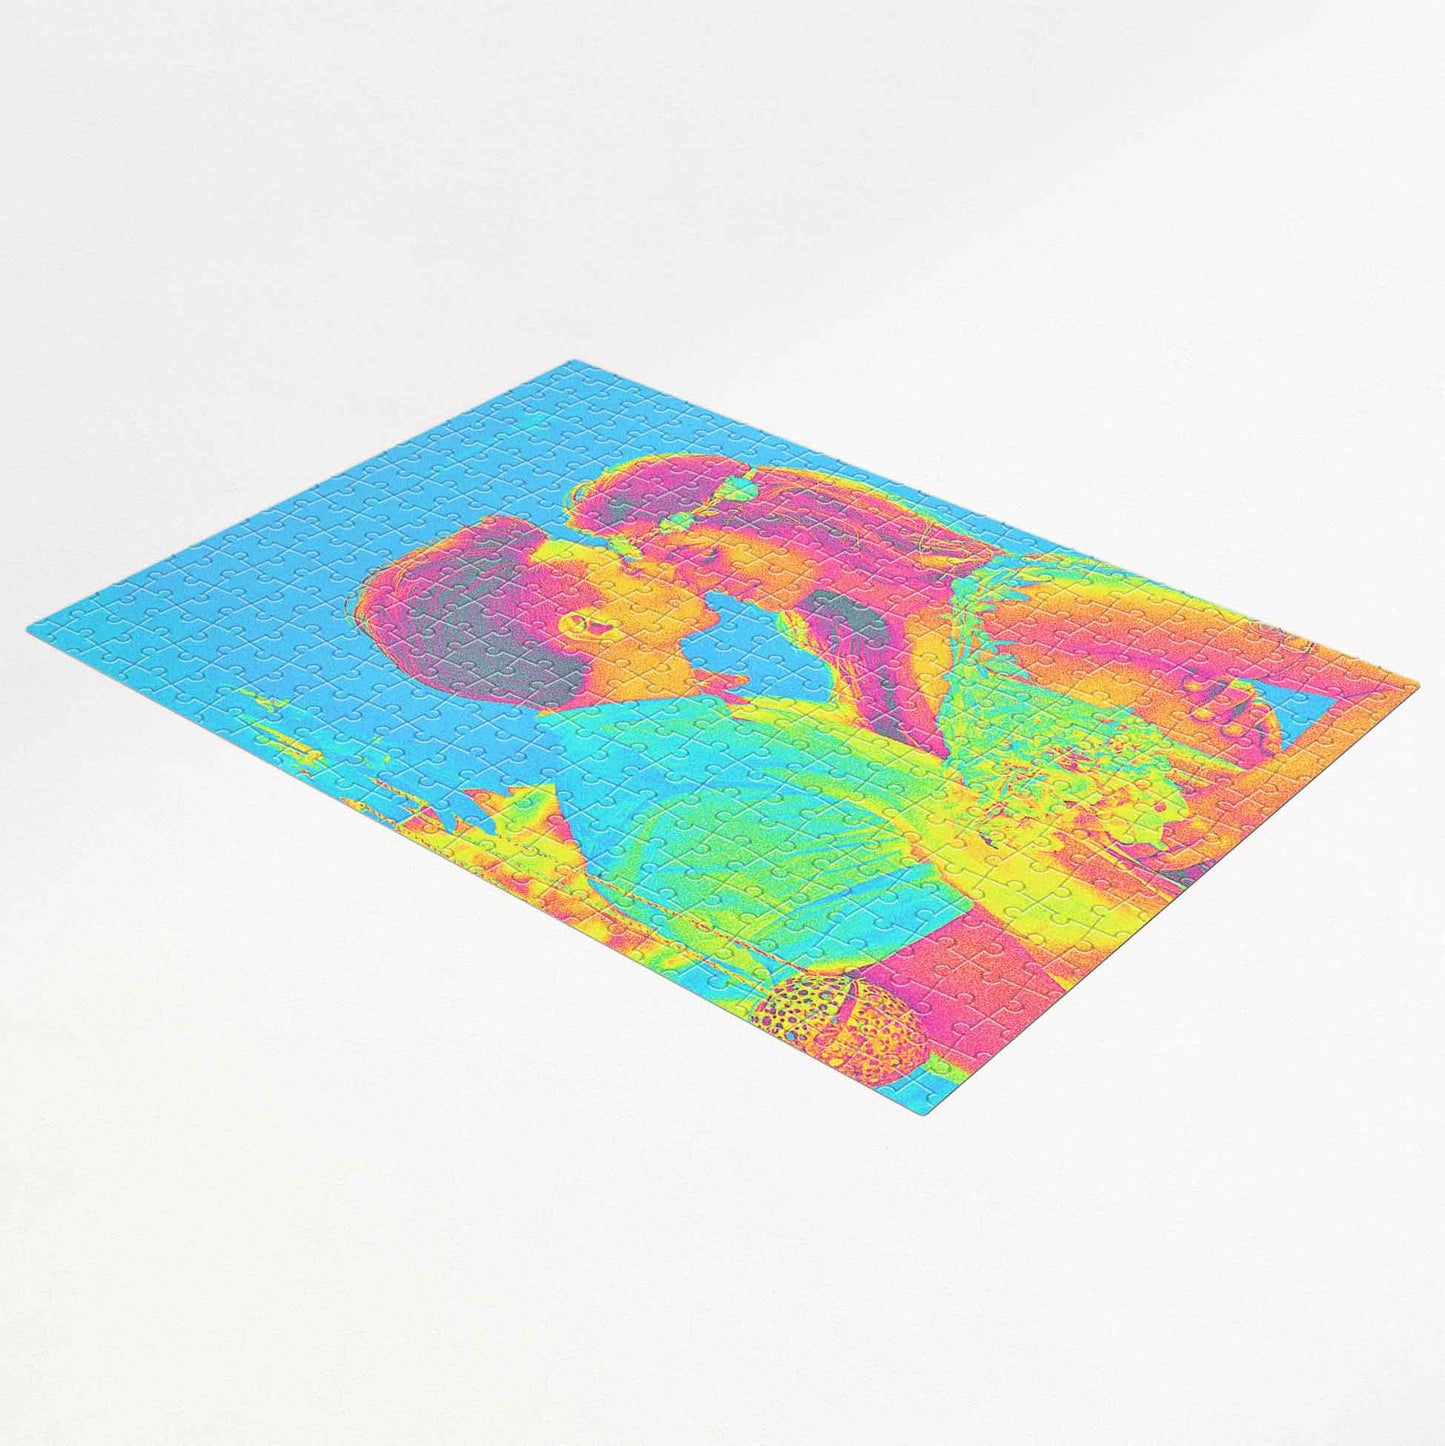 Personalised Acid Trip Jigsaw Puzzle - an imaginative delight. Print from photo, featuring edgy acid colors effect in blue, green, and pink hues. Handmade and trendy, it's a cool and fresh gift for friends and family